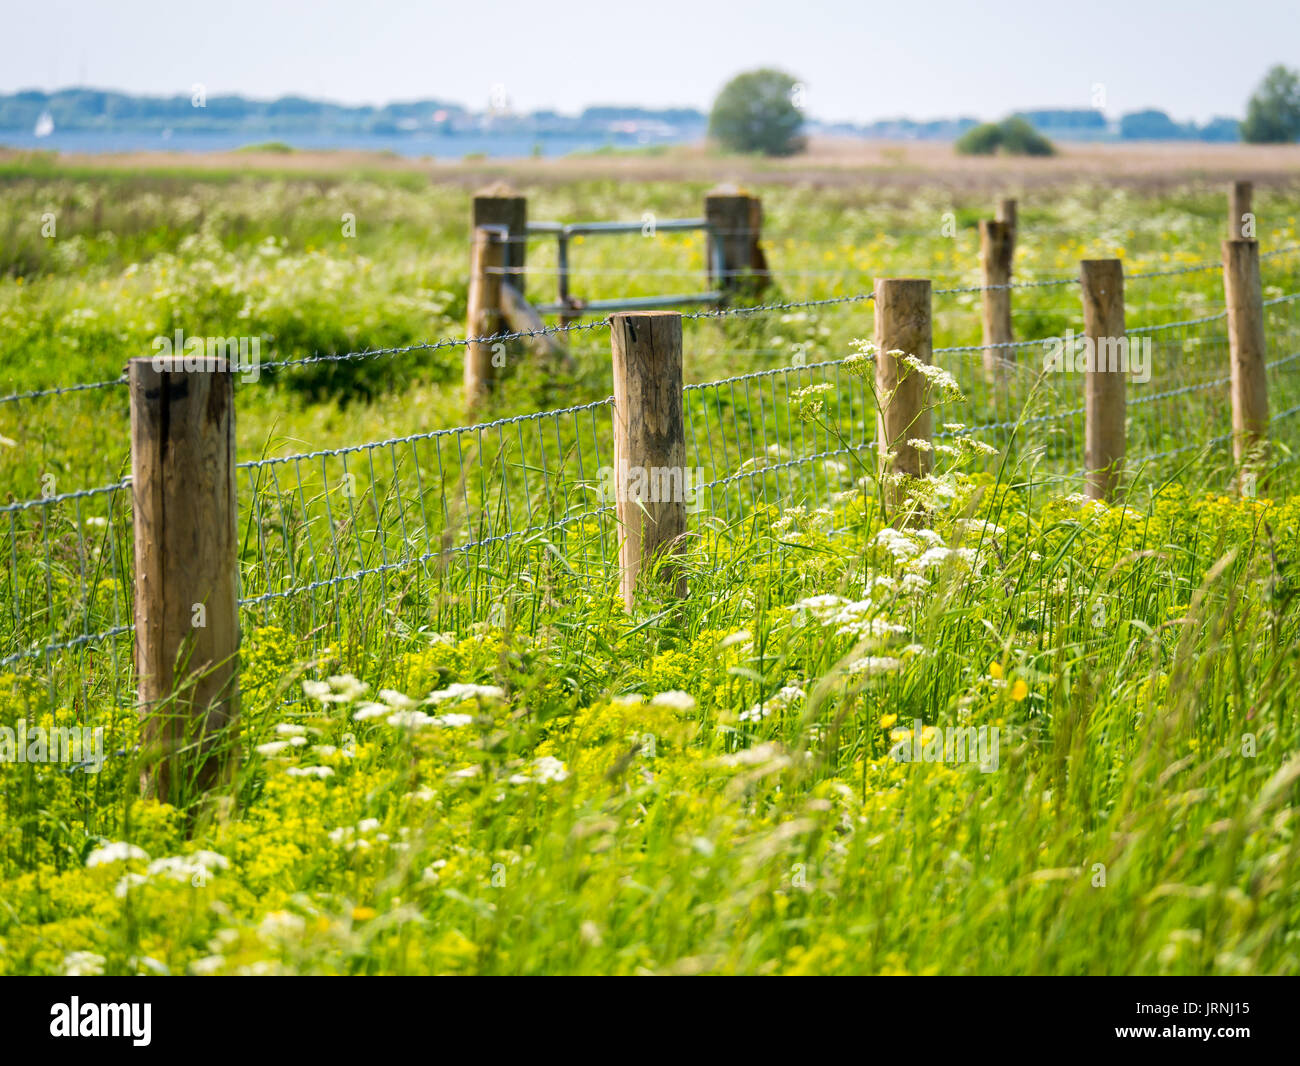 Fence of wooden posts, barbed wire and mesh surrounded by lush vegetation, grass and weed in nature reserve Quackgors, Netherlands Stock Photo